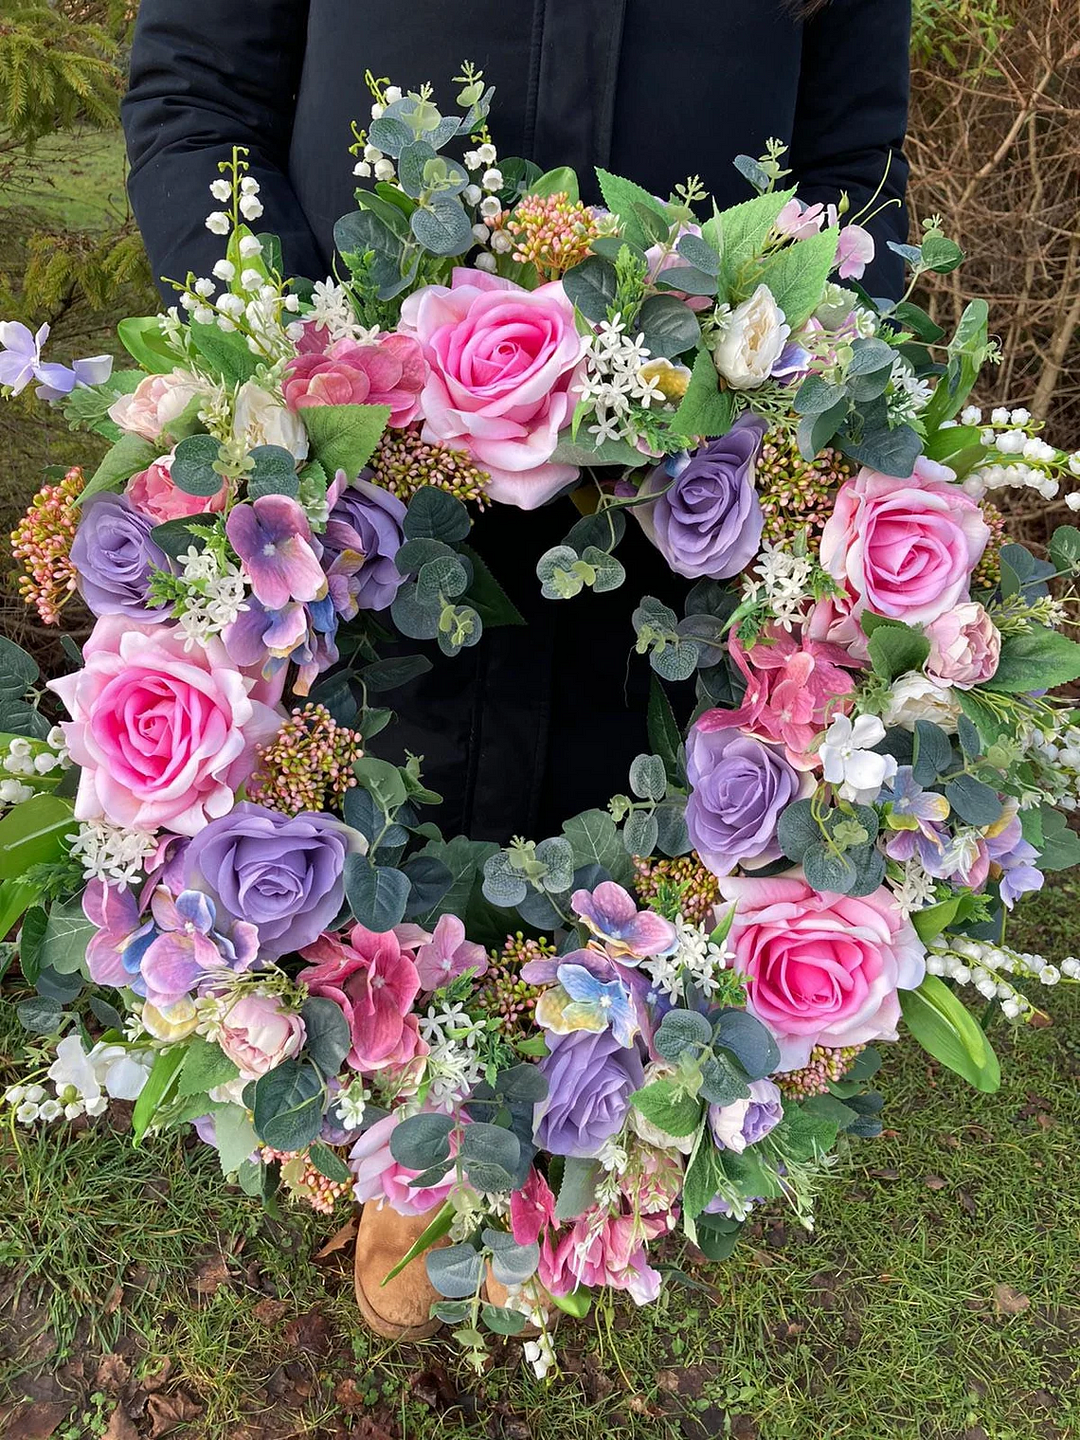 Get ready to give away a gorgeous pink rose🌷 wreath